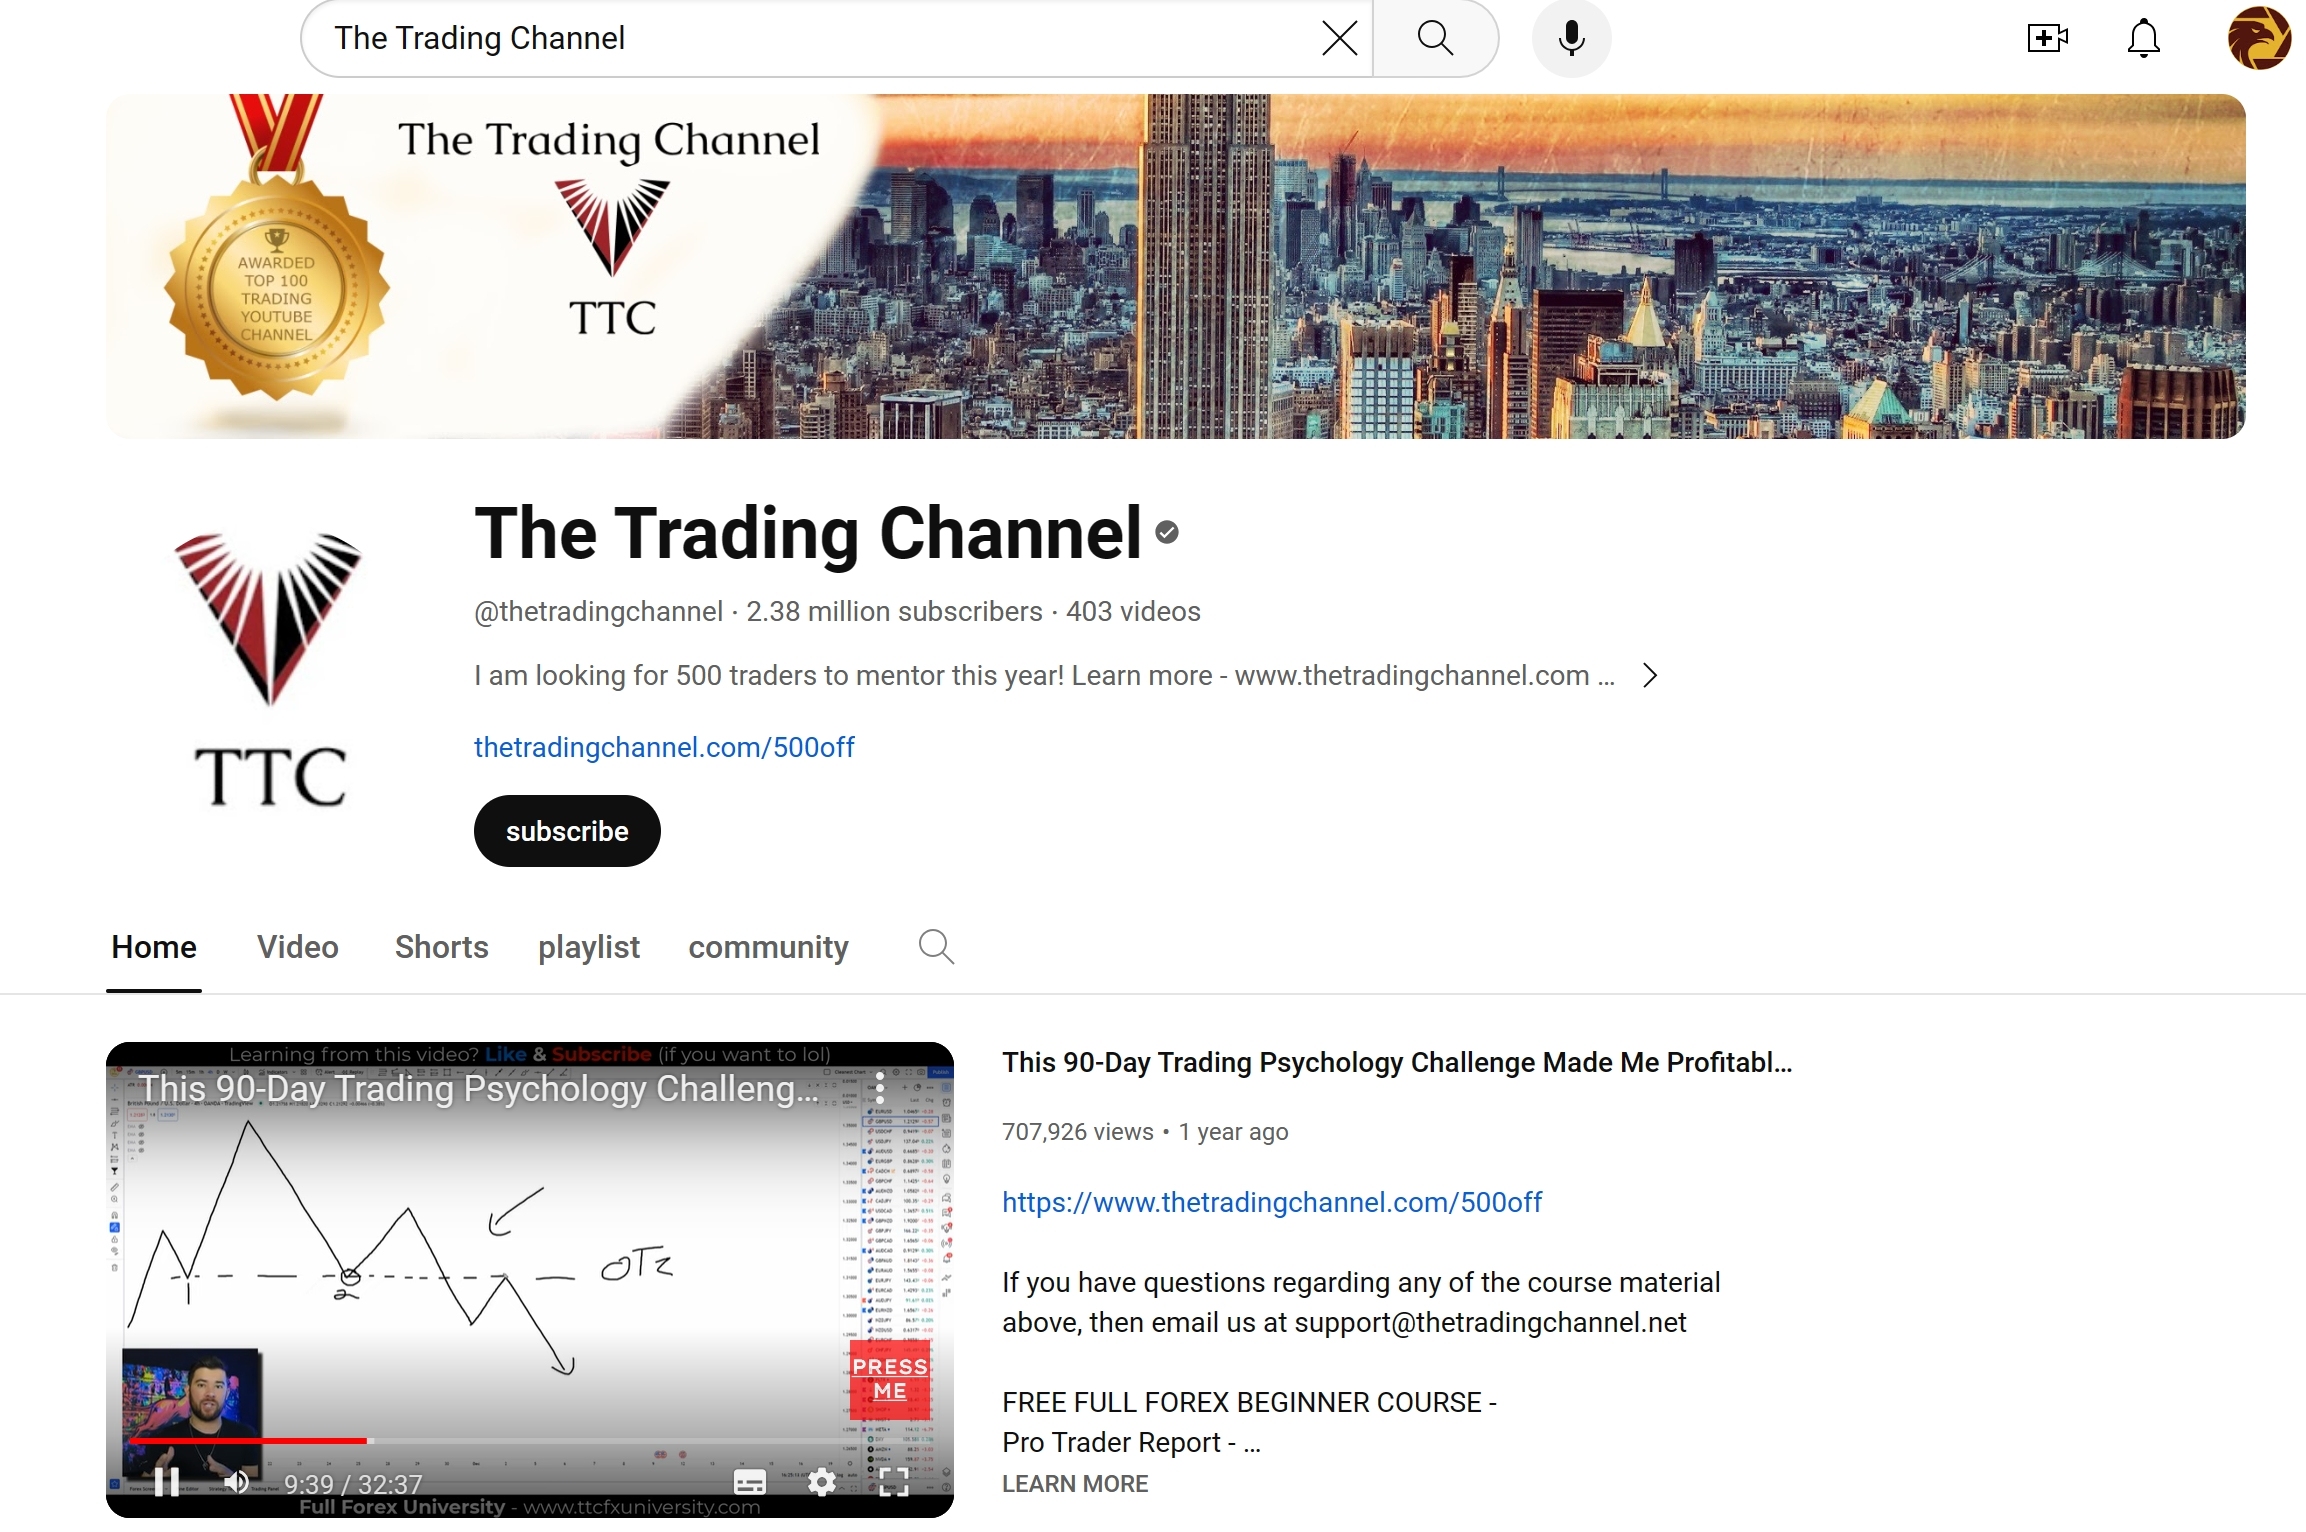 The Trading Channel YouTube homepage